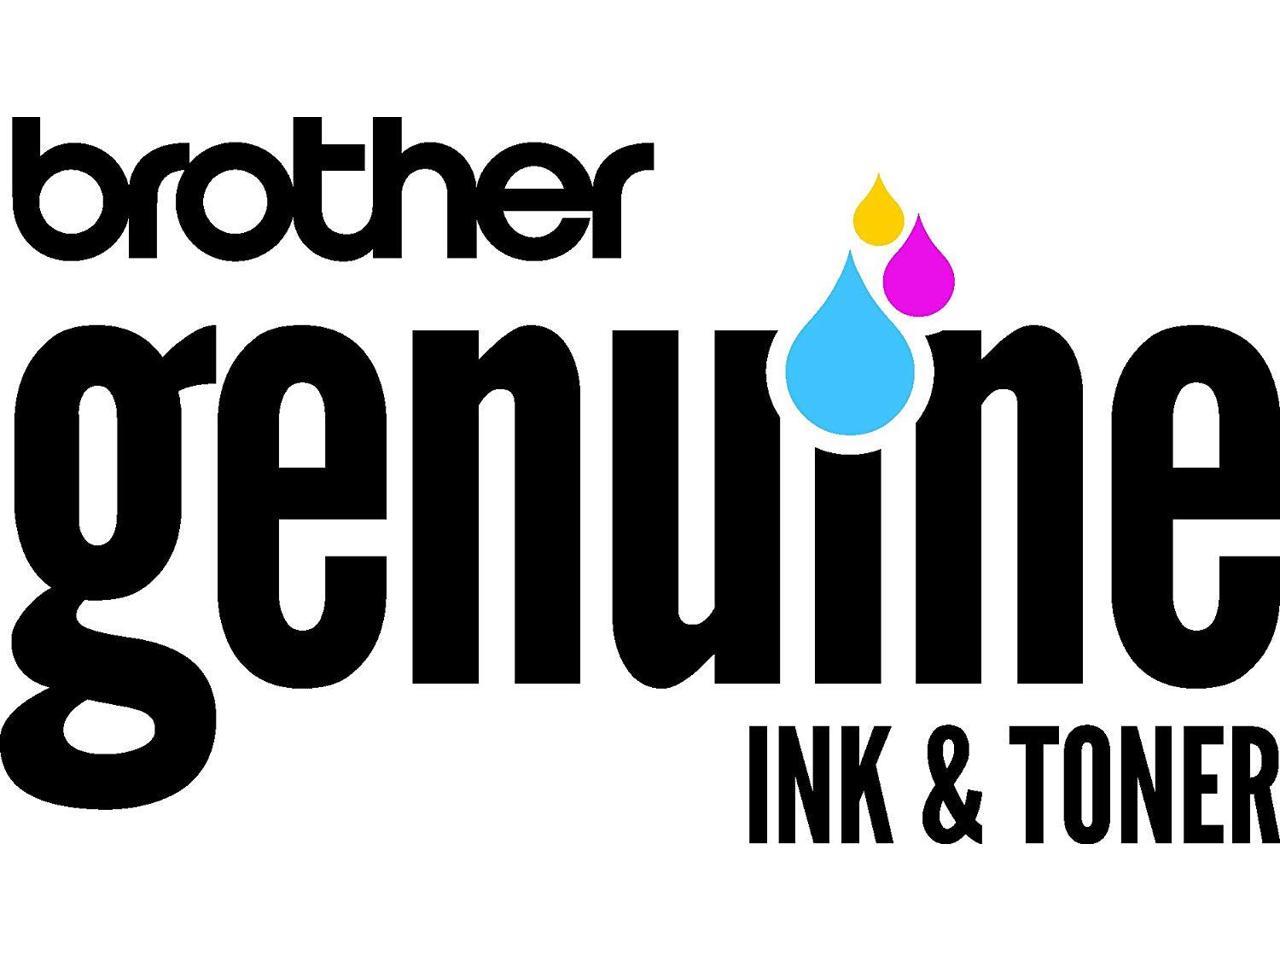 Brother LC30333PKS Super High Yield Ink Cartridge - Combo Pack - Cyan/Magenta/Yellow